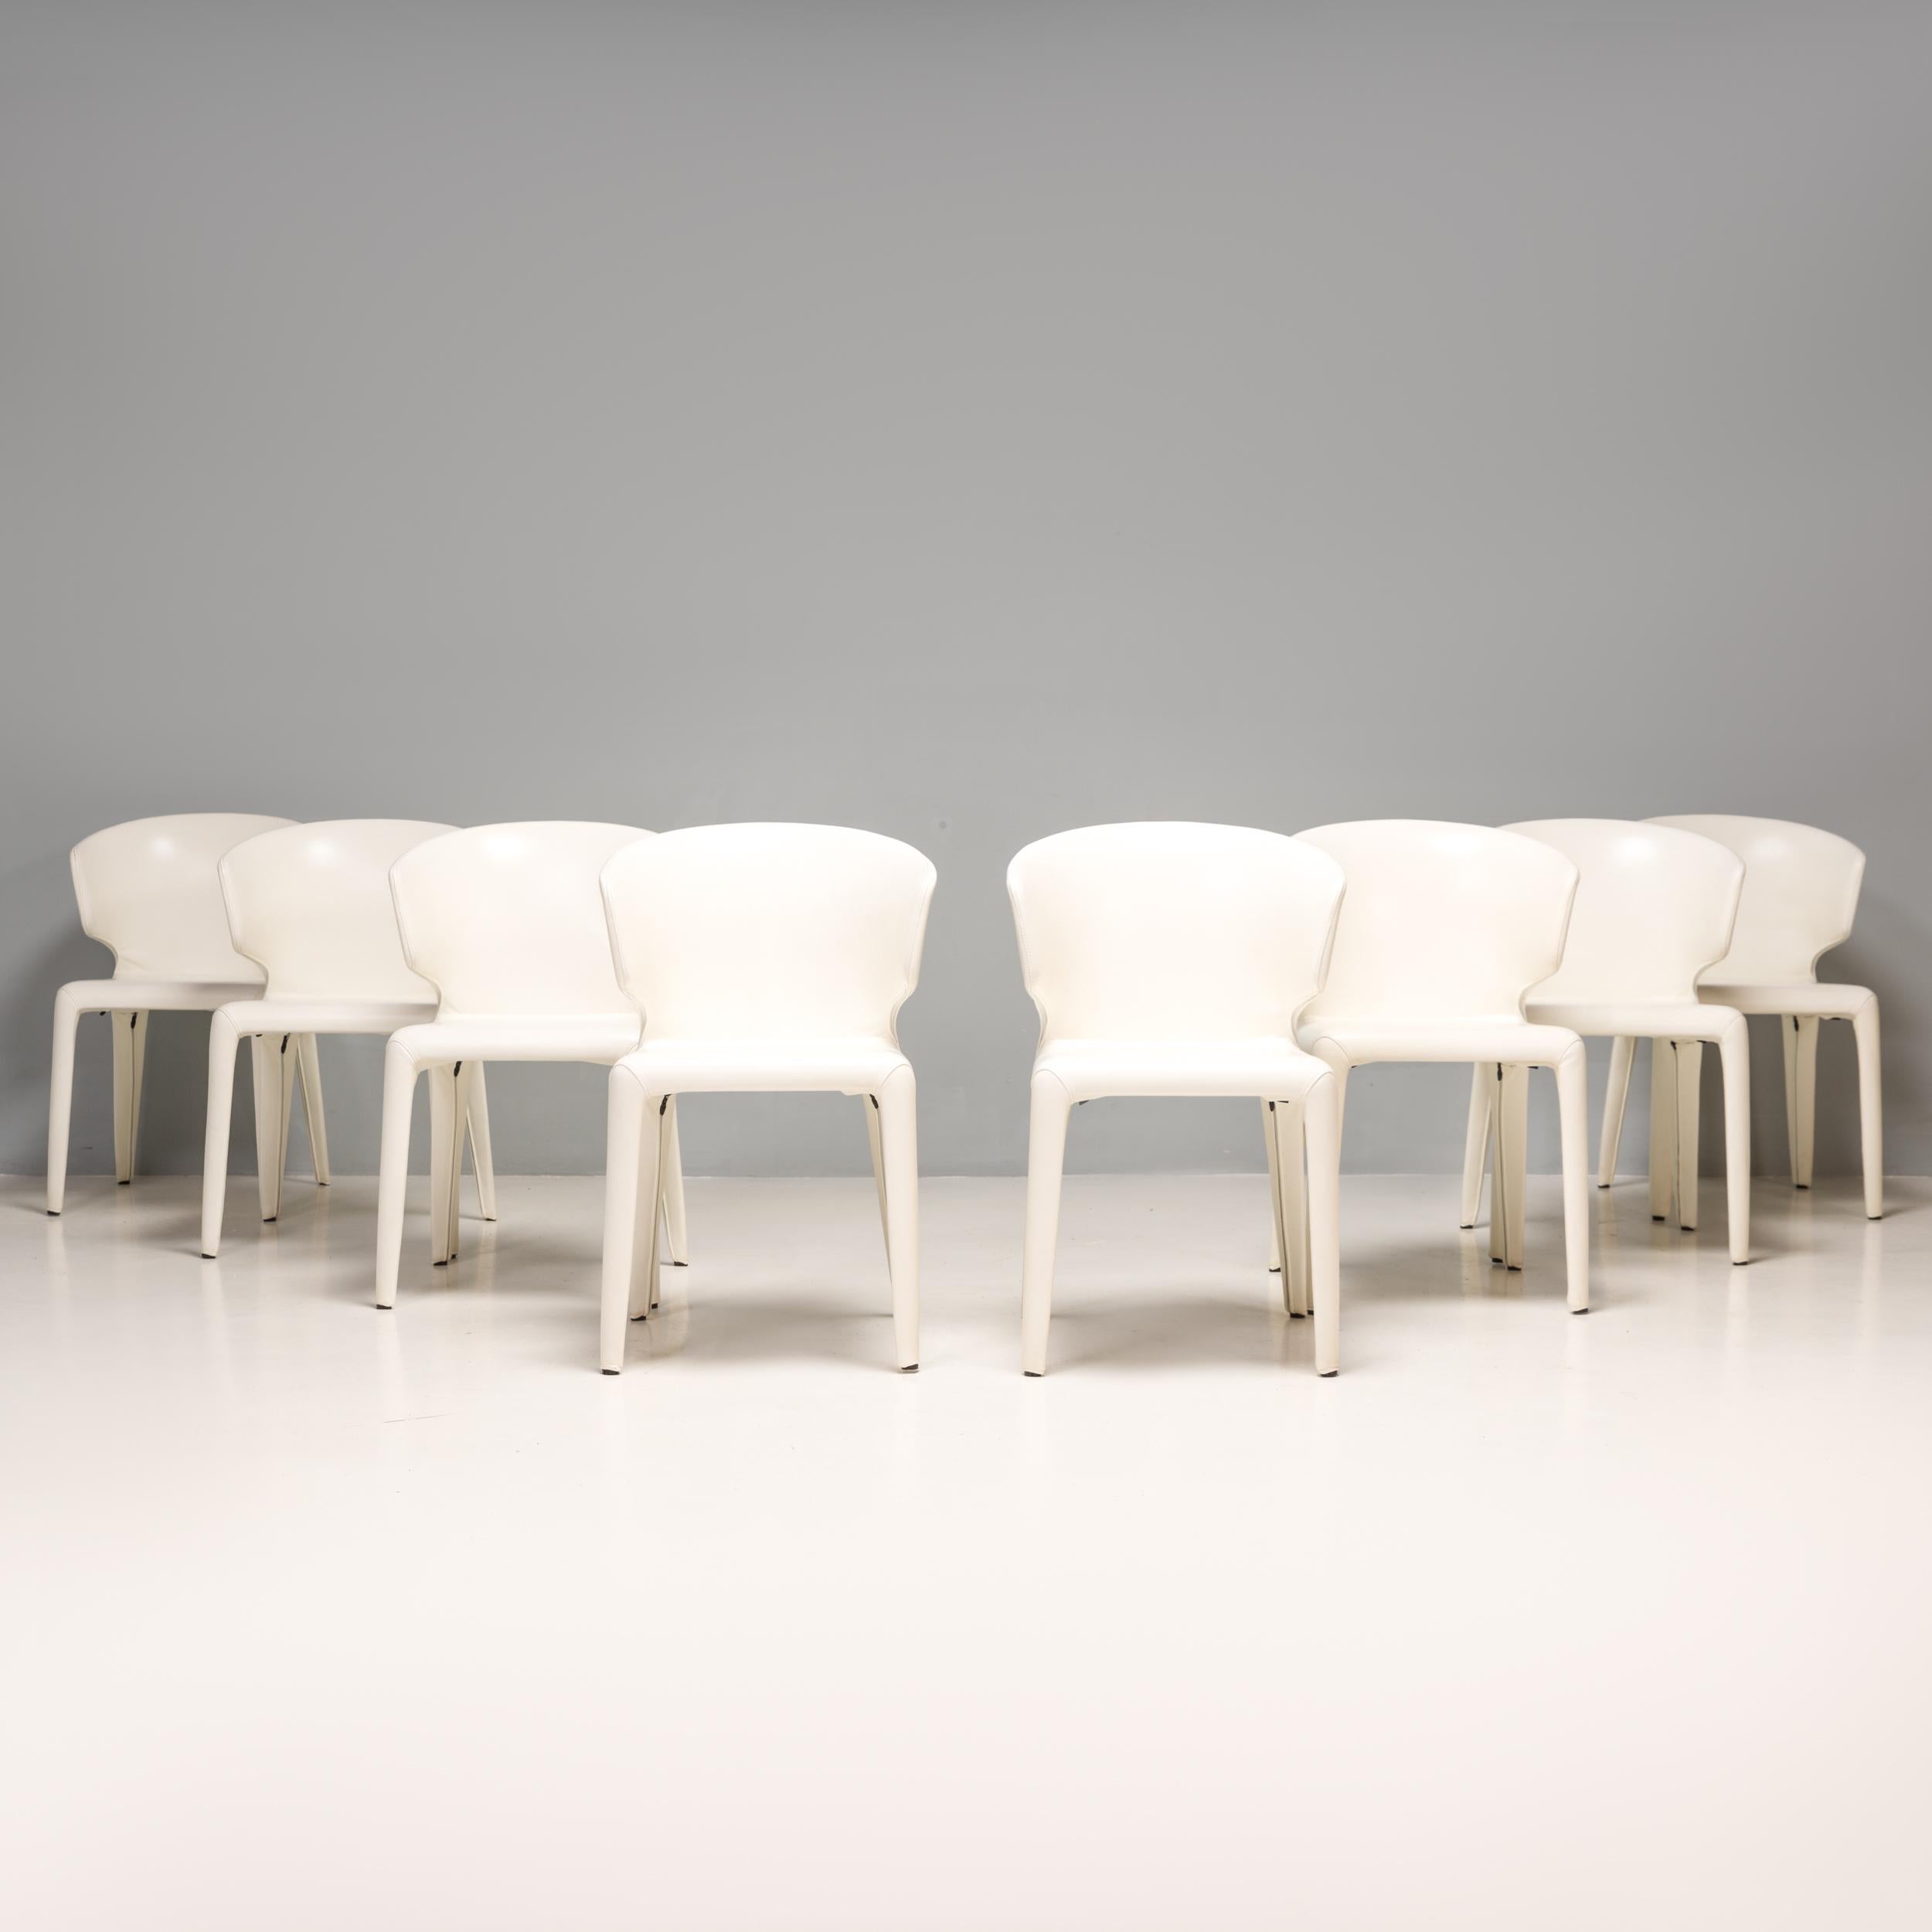 Designed by Hannes Wettstein for Cassina in 2003, these 367 Hola dining chairs have a sleek, contemporary silhouette.
 
The set of eight chairs are in excellent, nearly new condition and are fully upholstered in white leather.
 
Featuring a curved